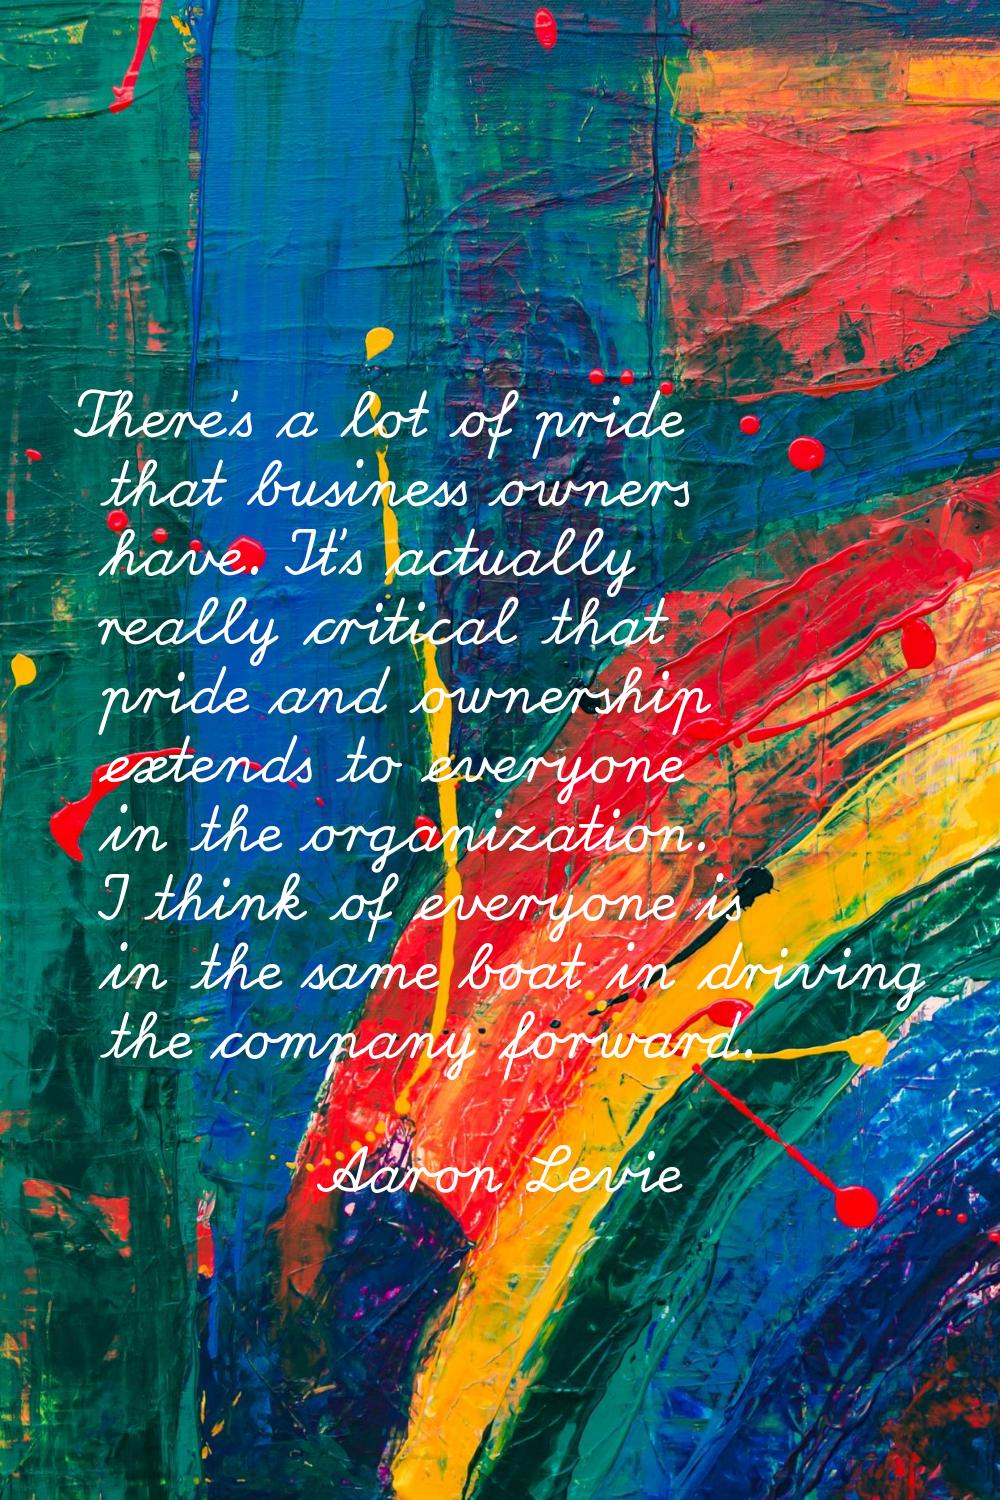 There's a lot of pride that business owners have. It's actually really critical that pride and owne